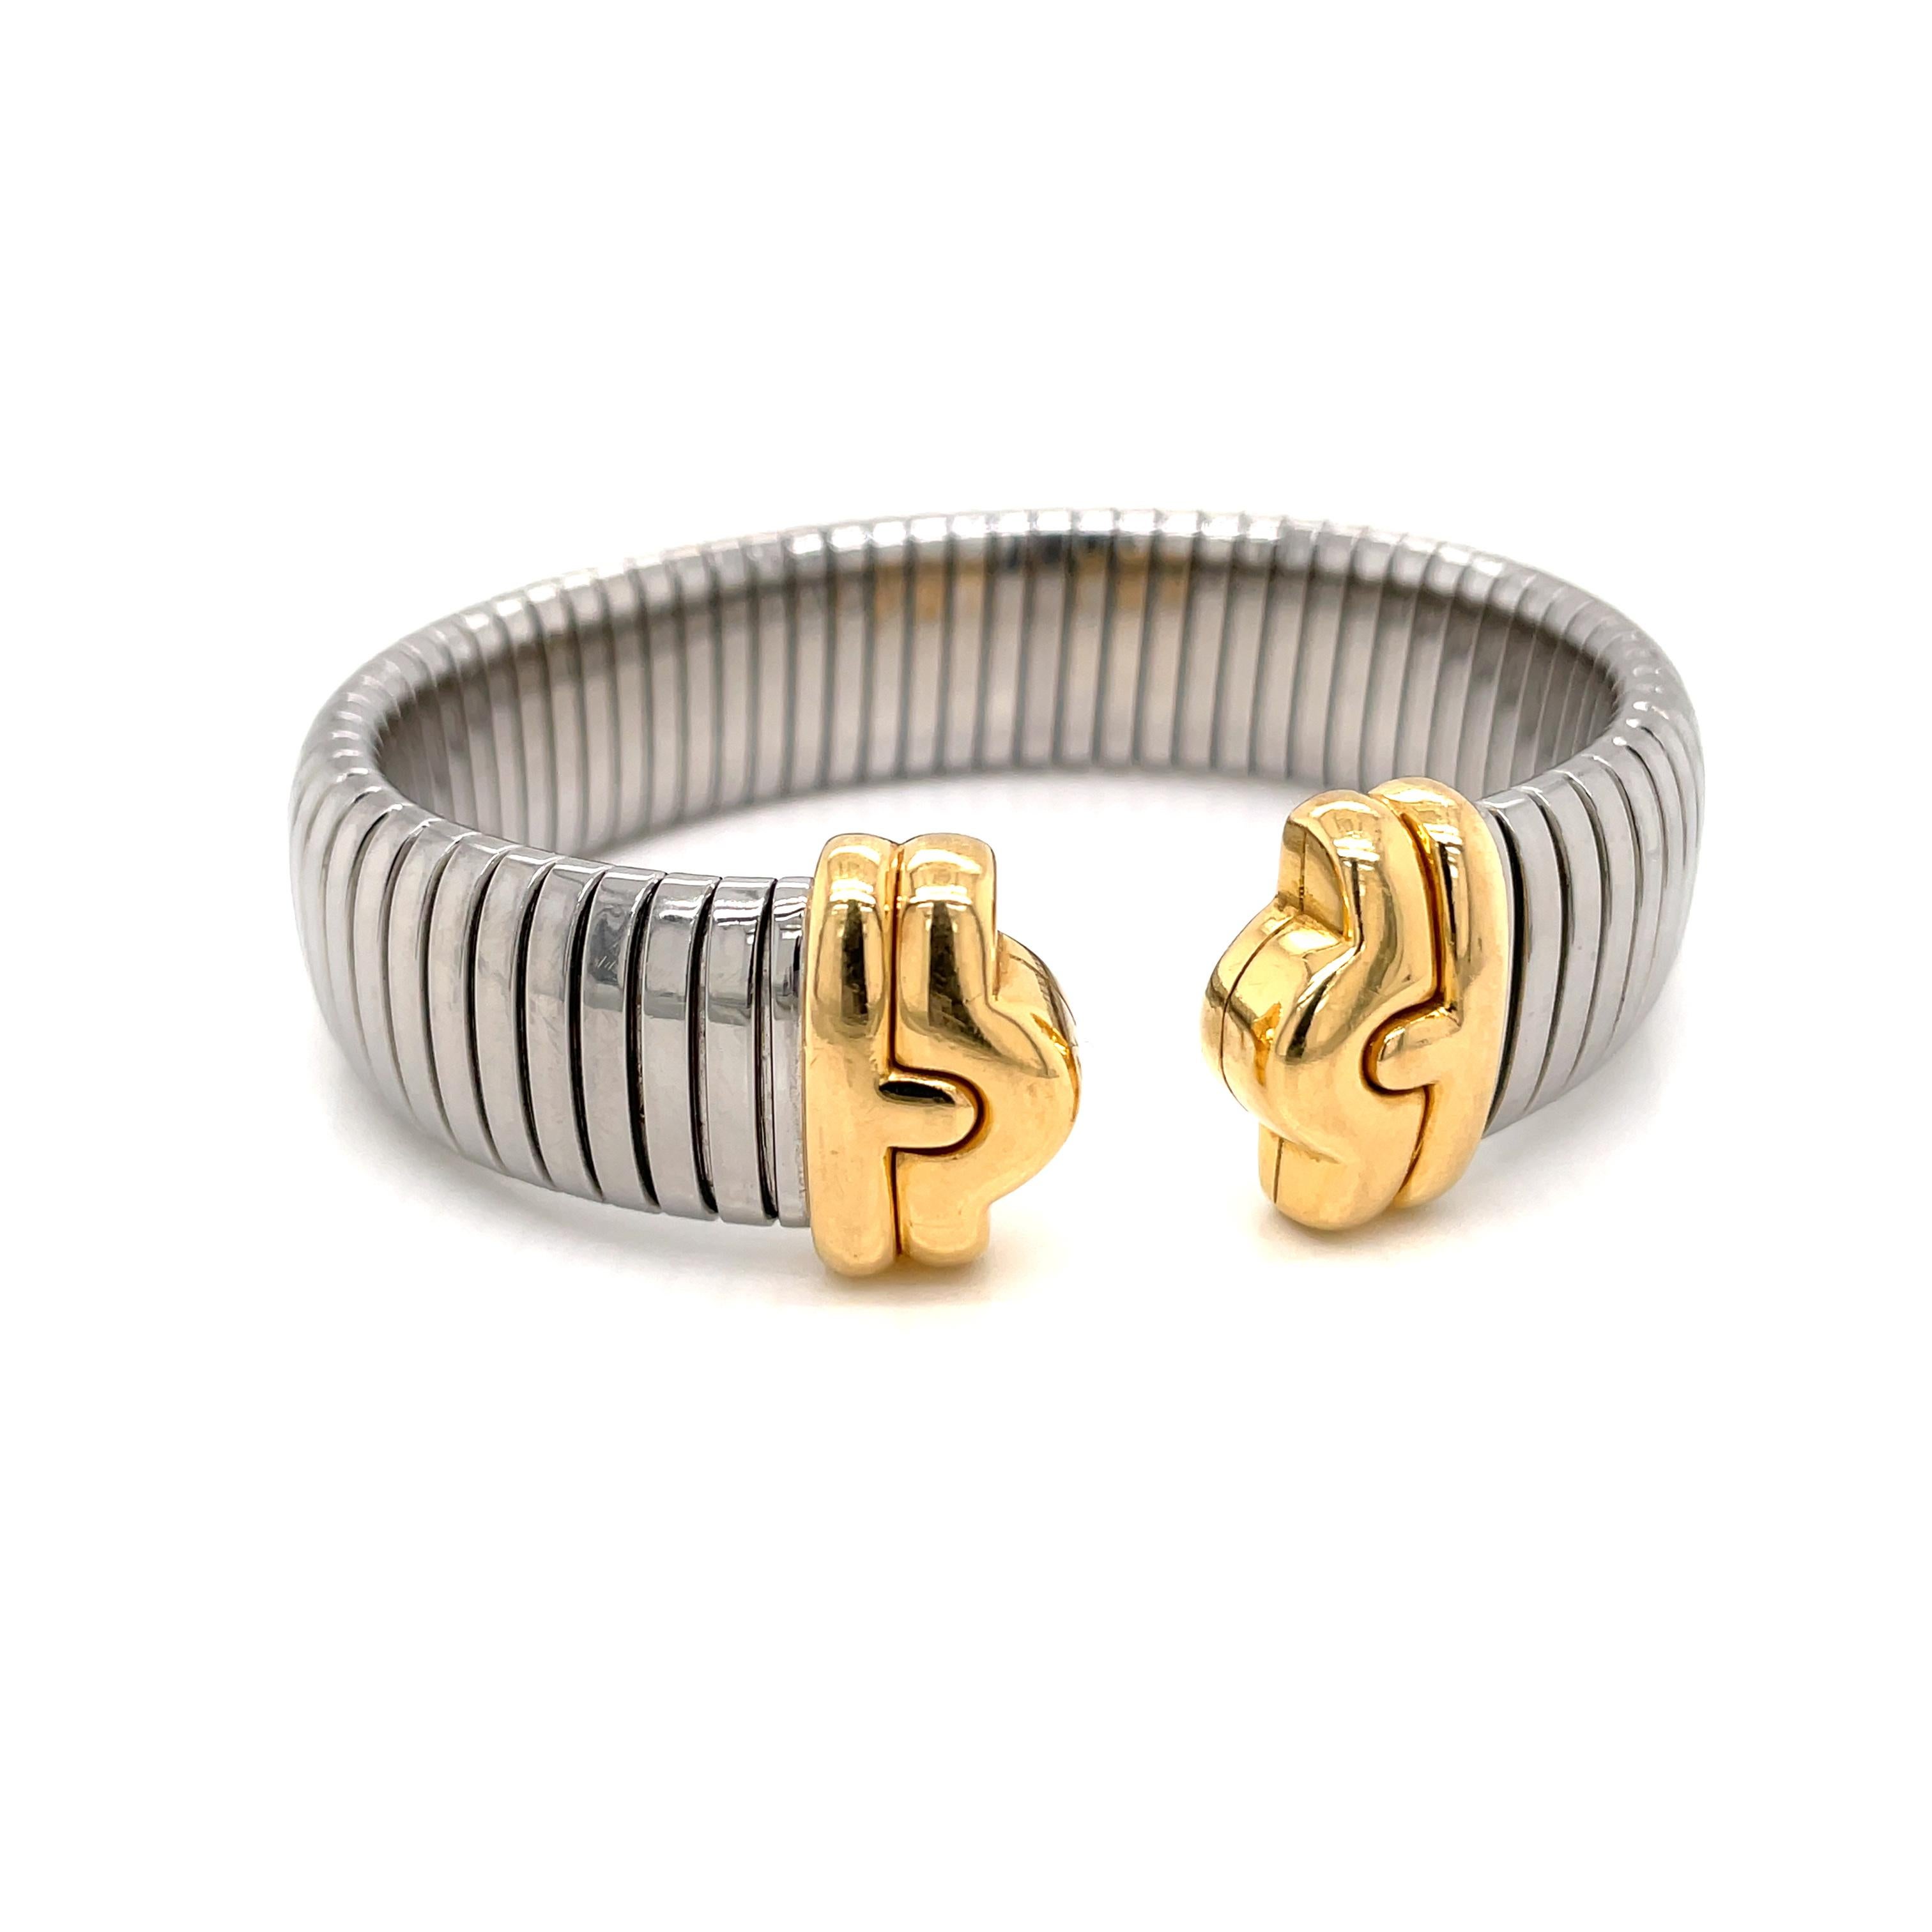 Iconic vintage Tubogas Bulgari Parentesi bracelet cuff. Stainless steel flexible body of the bracelet and 18k yellow gold ends.

Material: 18kt yellow gold, stainless steel
Total weight: 57 gr

Measurements: The bracelet can fit a 17/18 cm wrist,